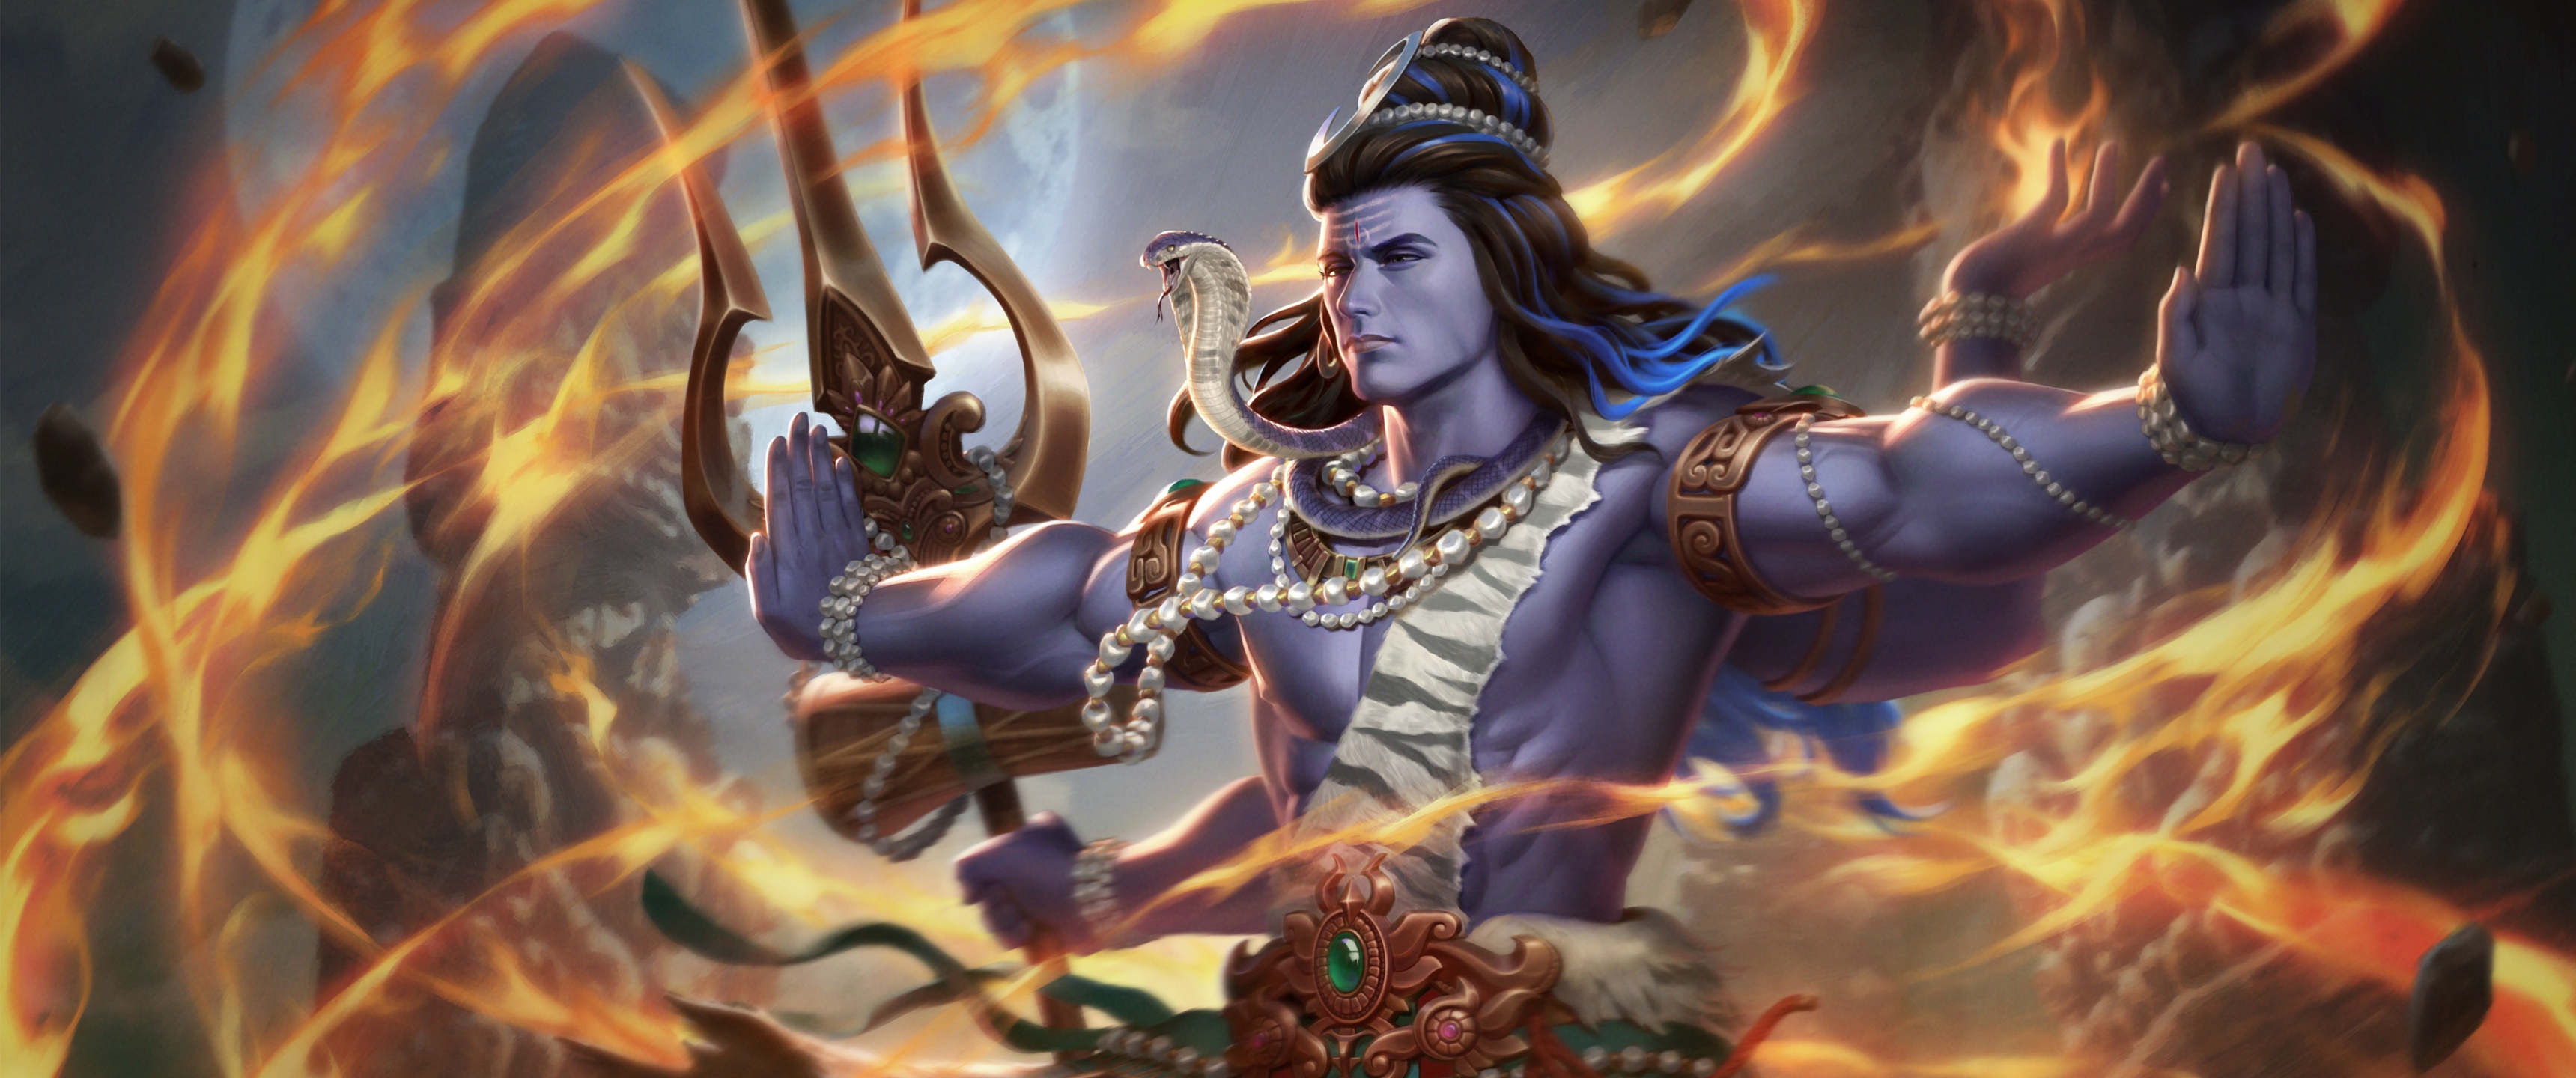 Abstract Shiva Stock Photos and Images  123RF